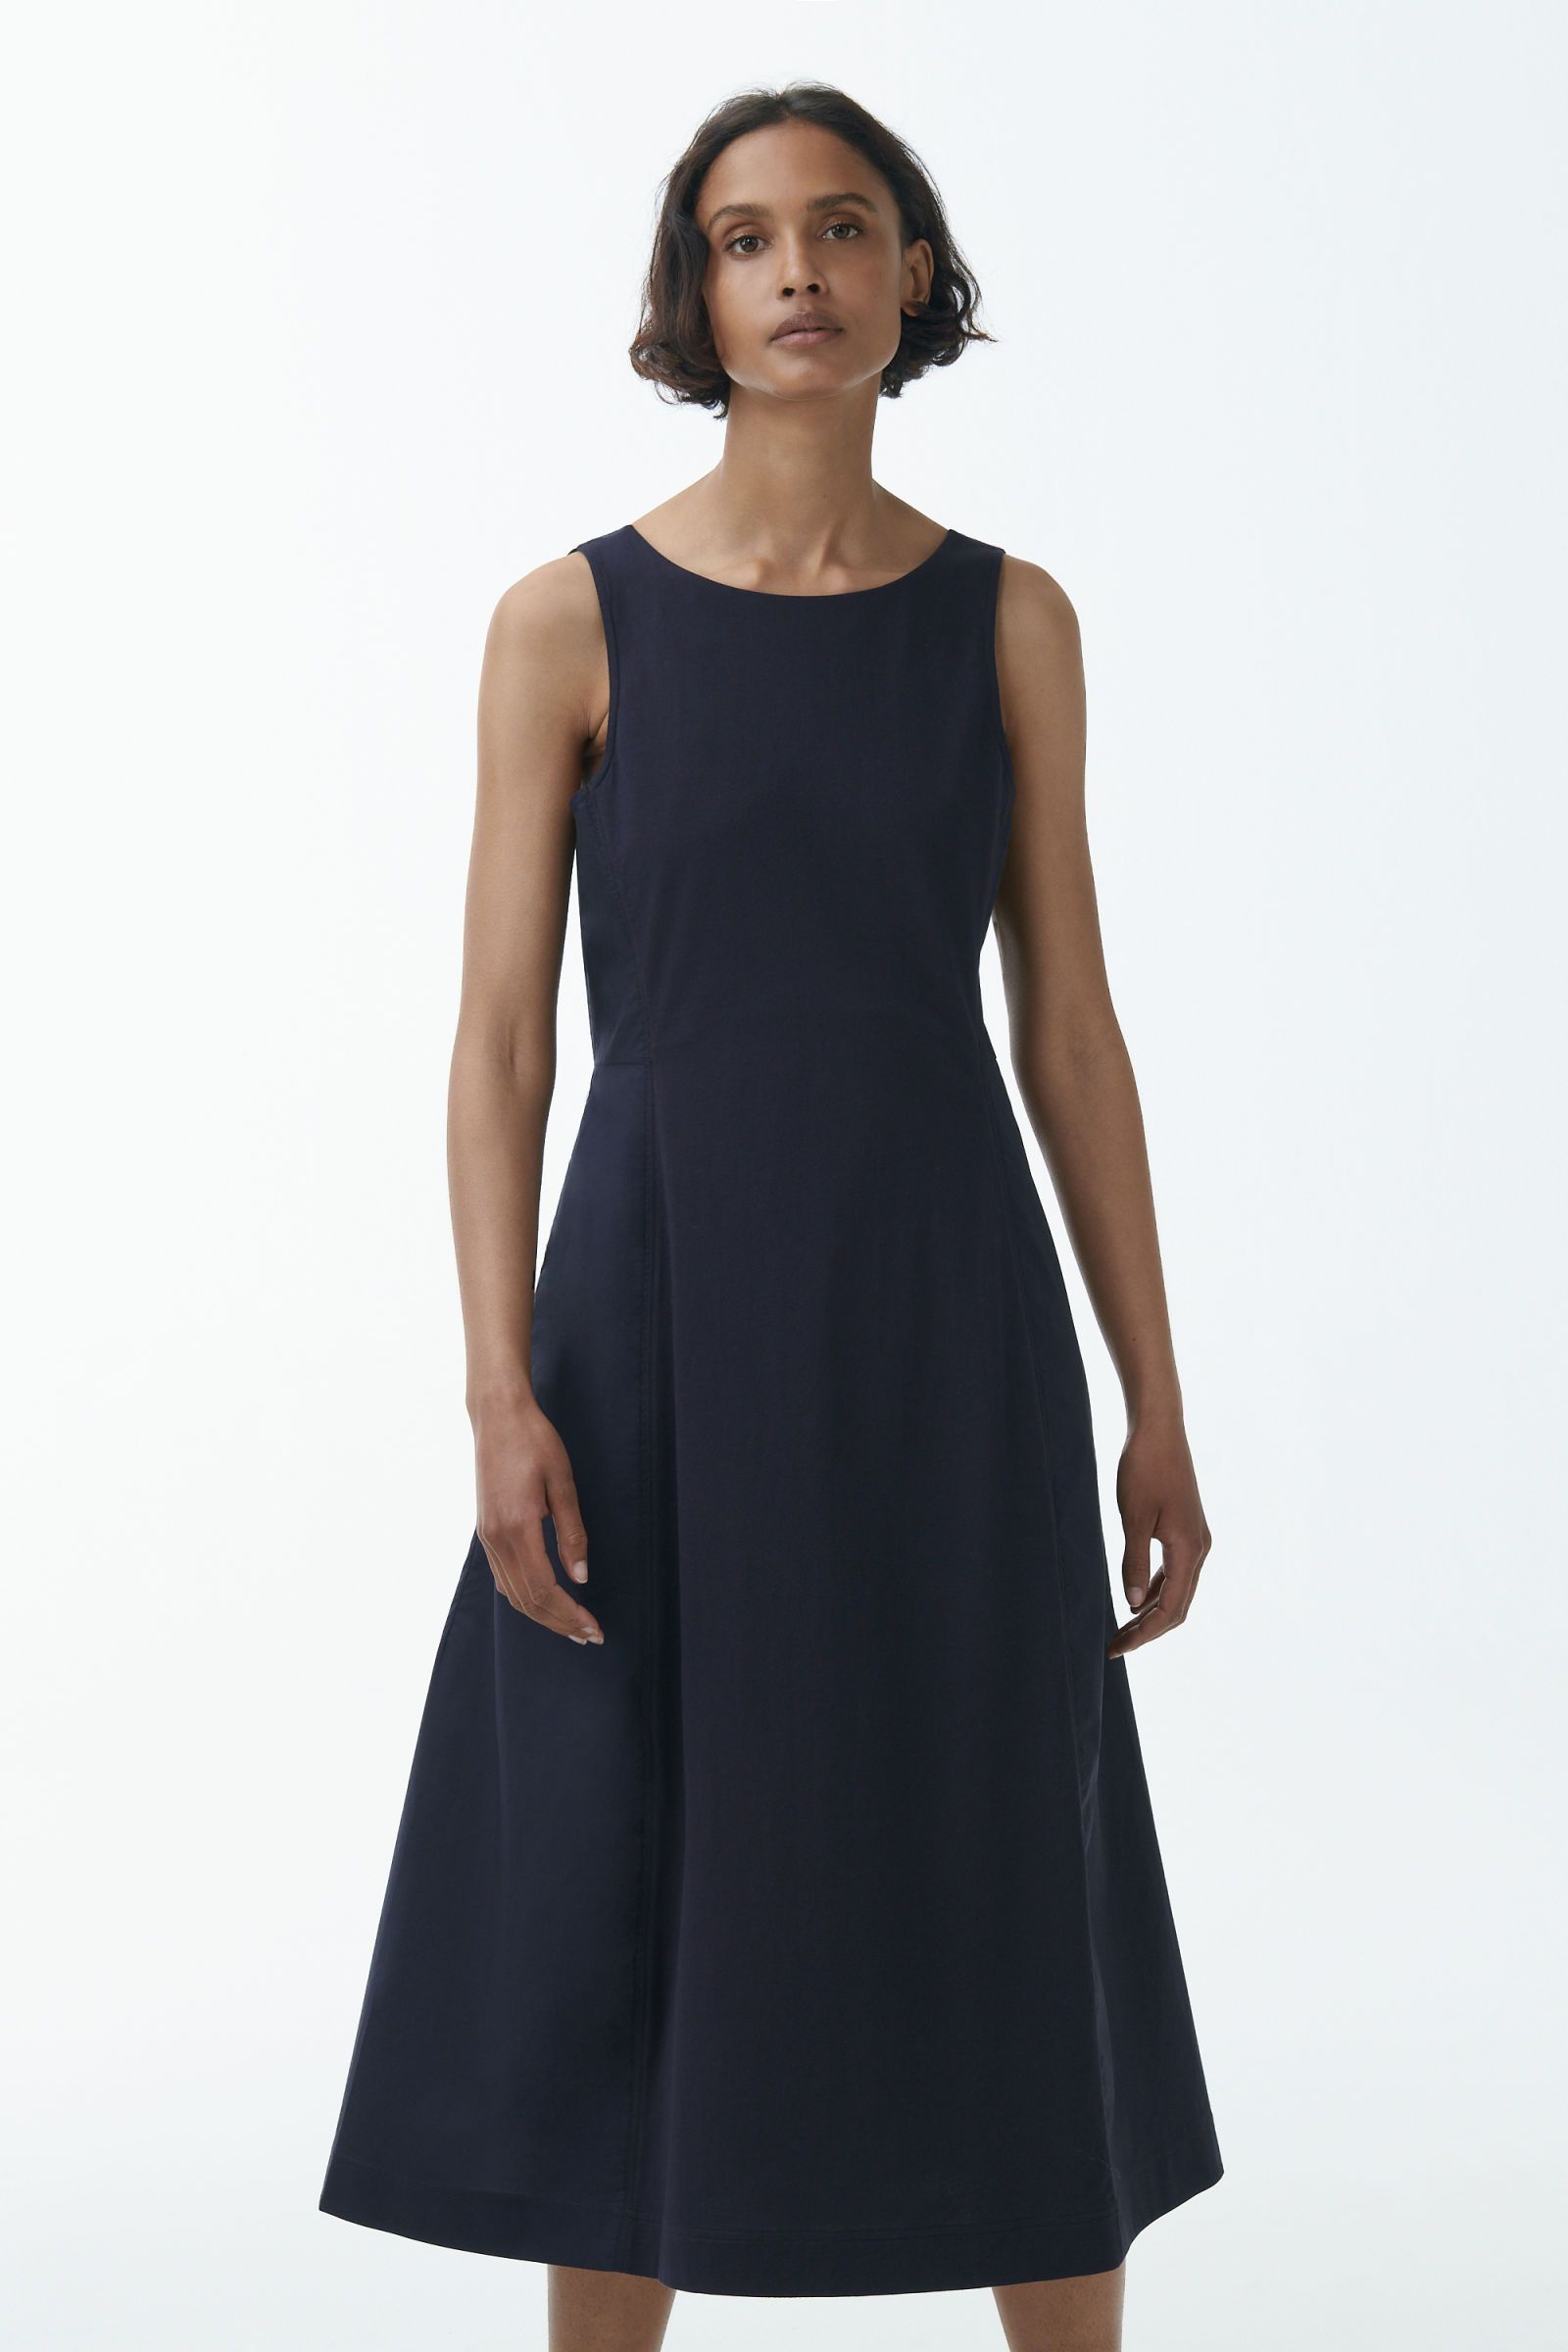 Cos Sleeveless Cotton Midi Fit and Flare Dress Review 2020 | The Strategist